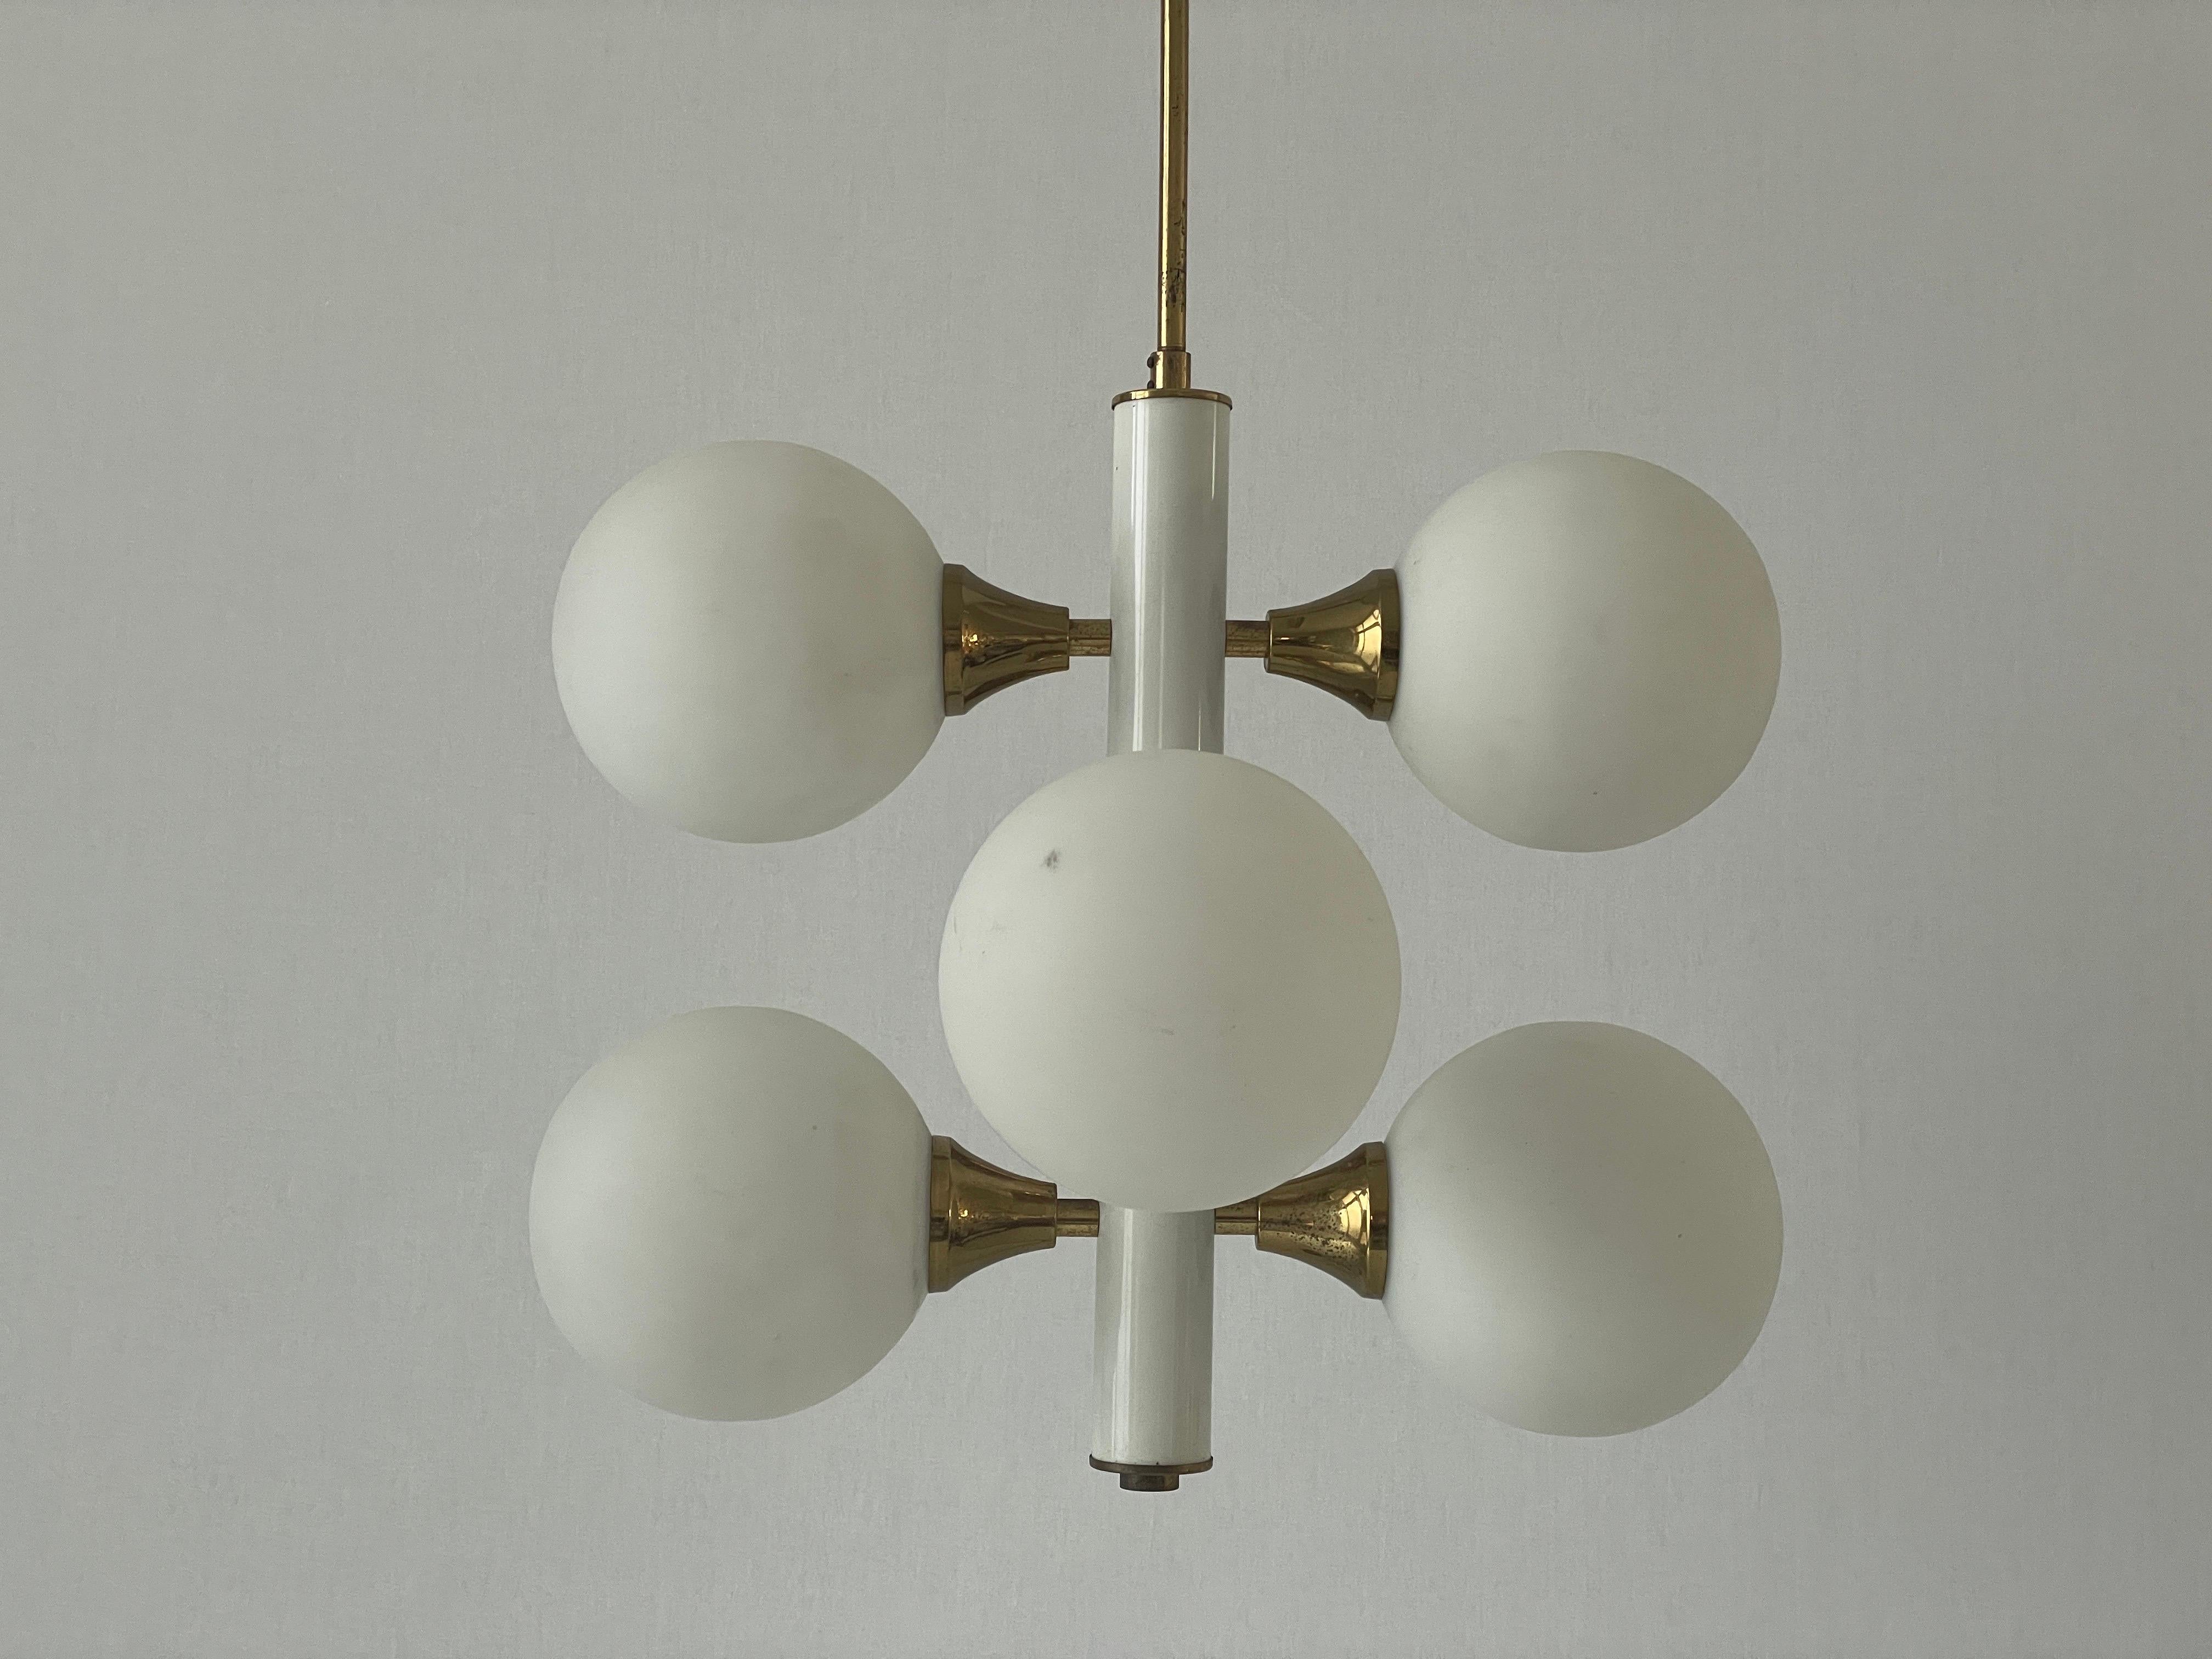 6 white ball Glass Sputnik Chandelier by Kaiser Leuchten, 1960s, Germany

Lampshade is in good condition and very clean. 
This lamp works with 6 x E14 light bulb. 
Wired and suitable to use with 220V and 110V for all countries.

Measurements: